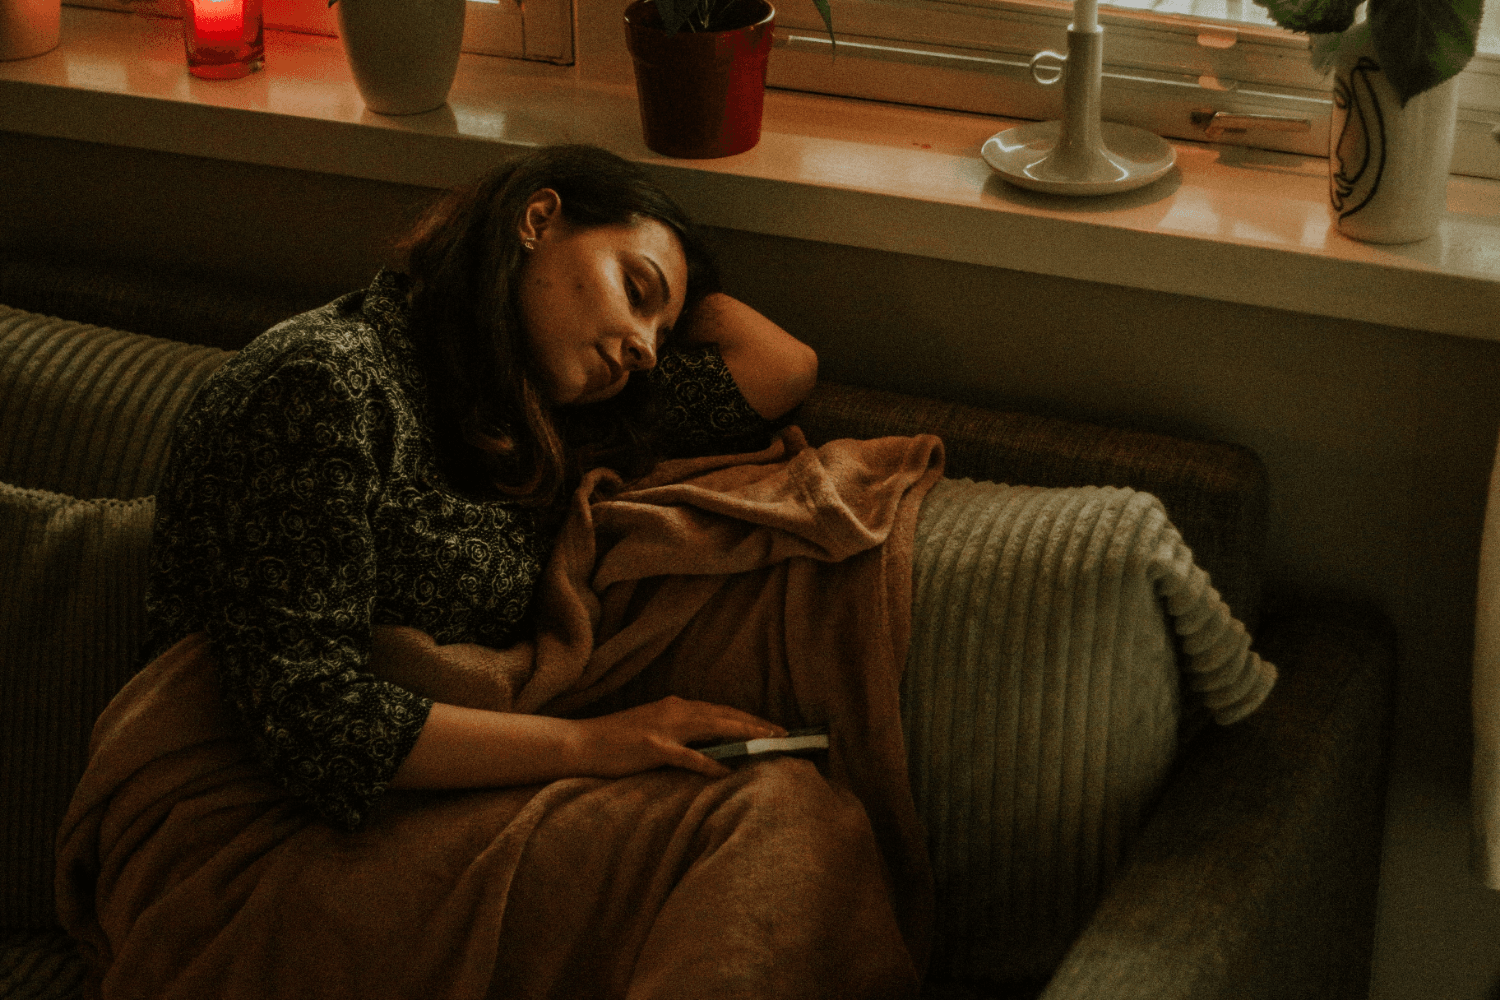 woman napping on a sofa with dimmed lights